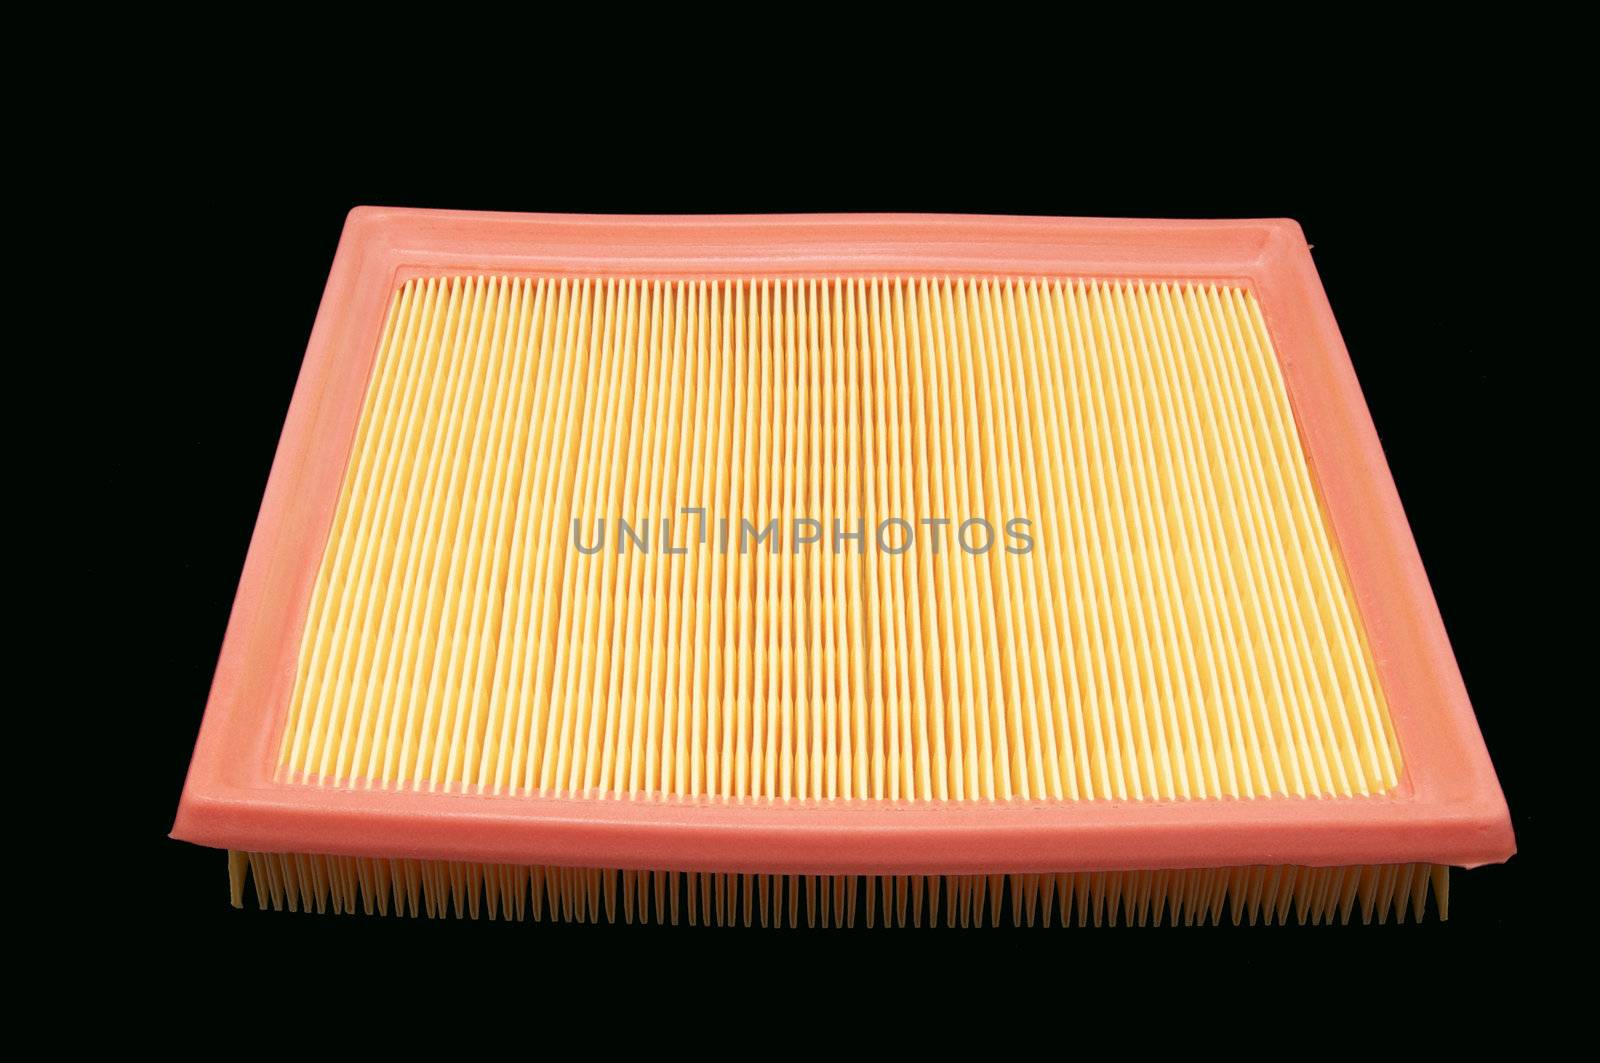 Air Filter for car by Lester120